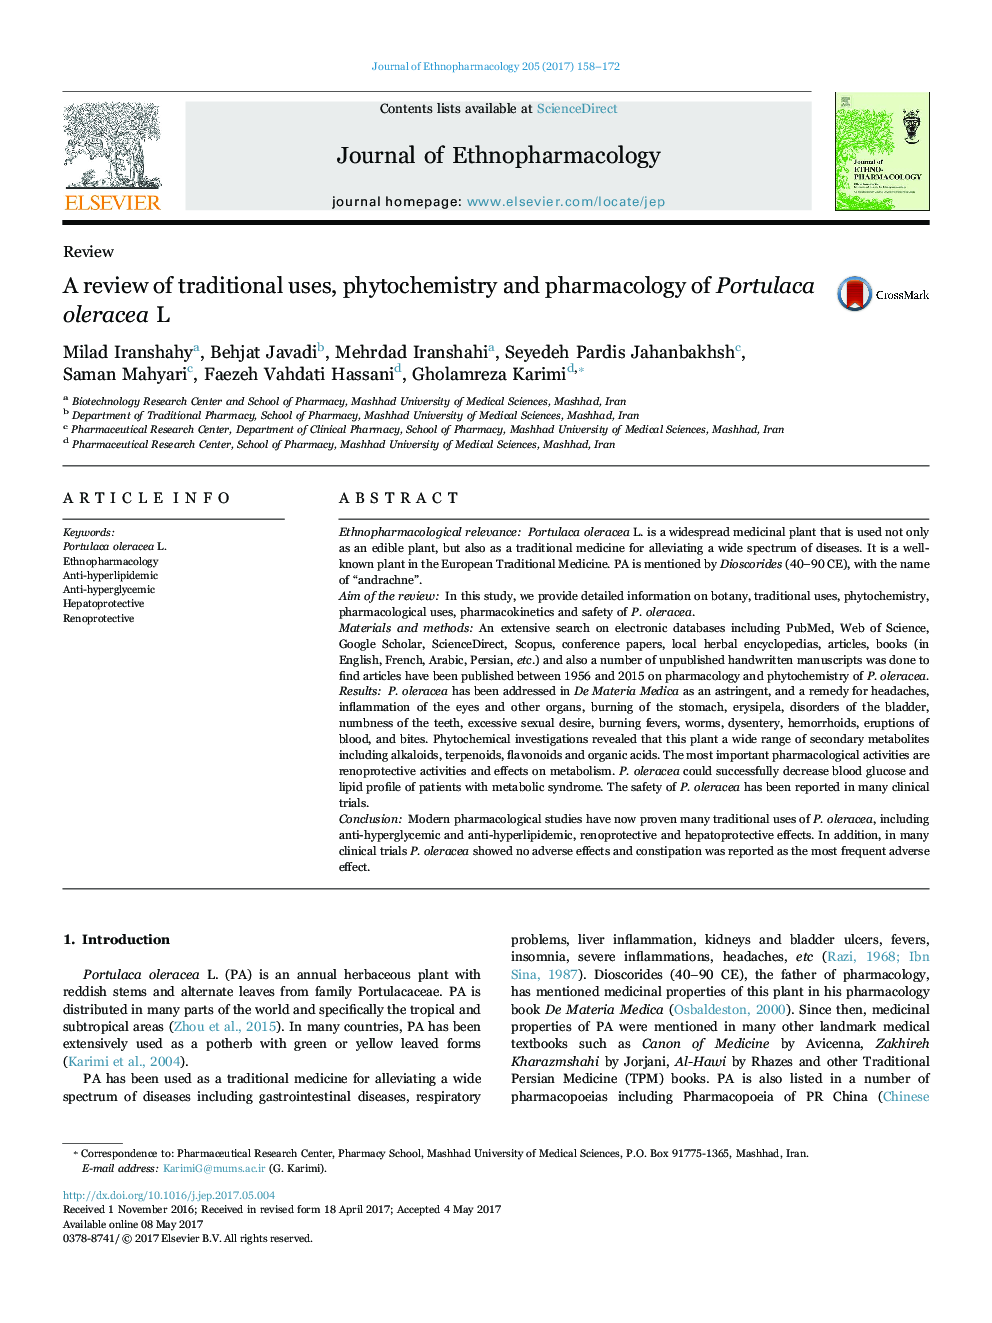 A review of traditional uses, phytochemistry and pharmacology of Portulaca oleracea L